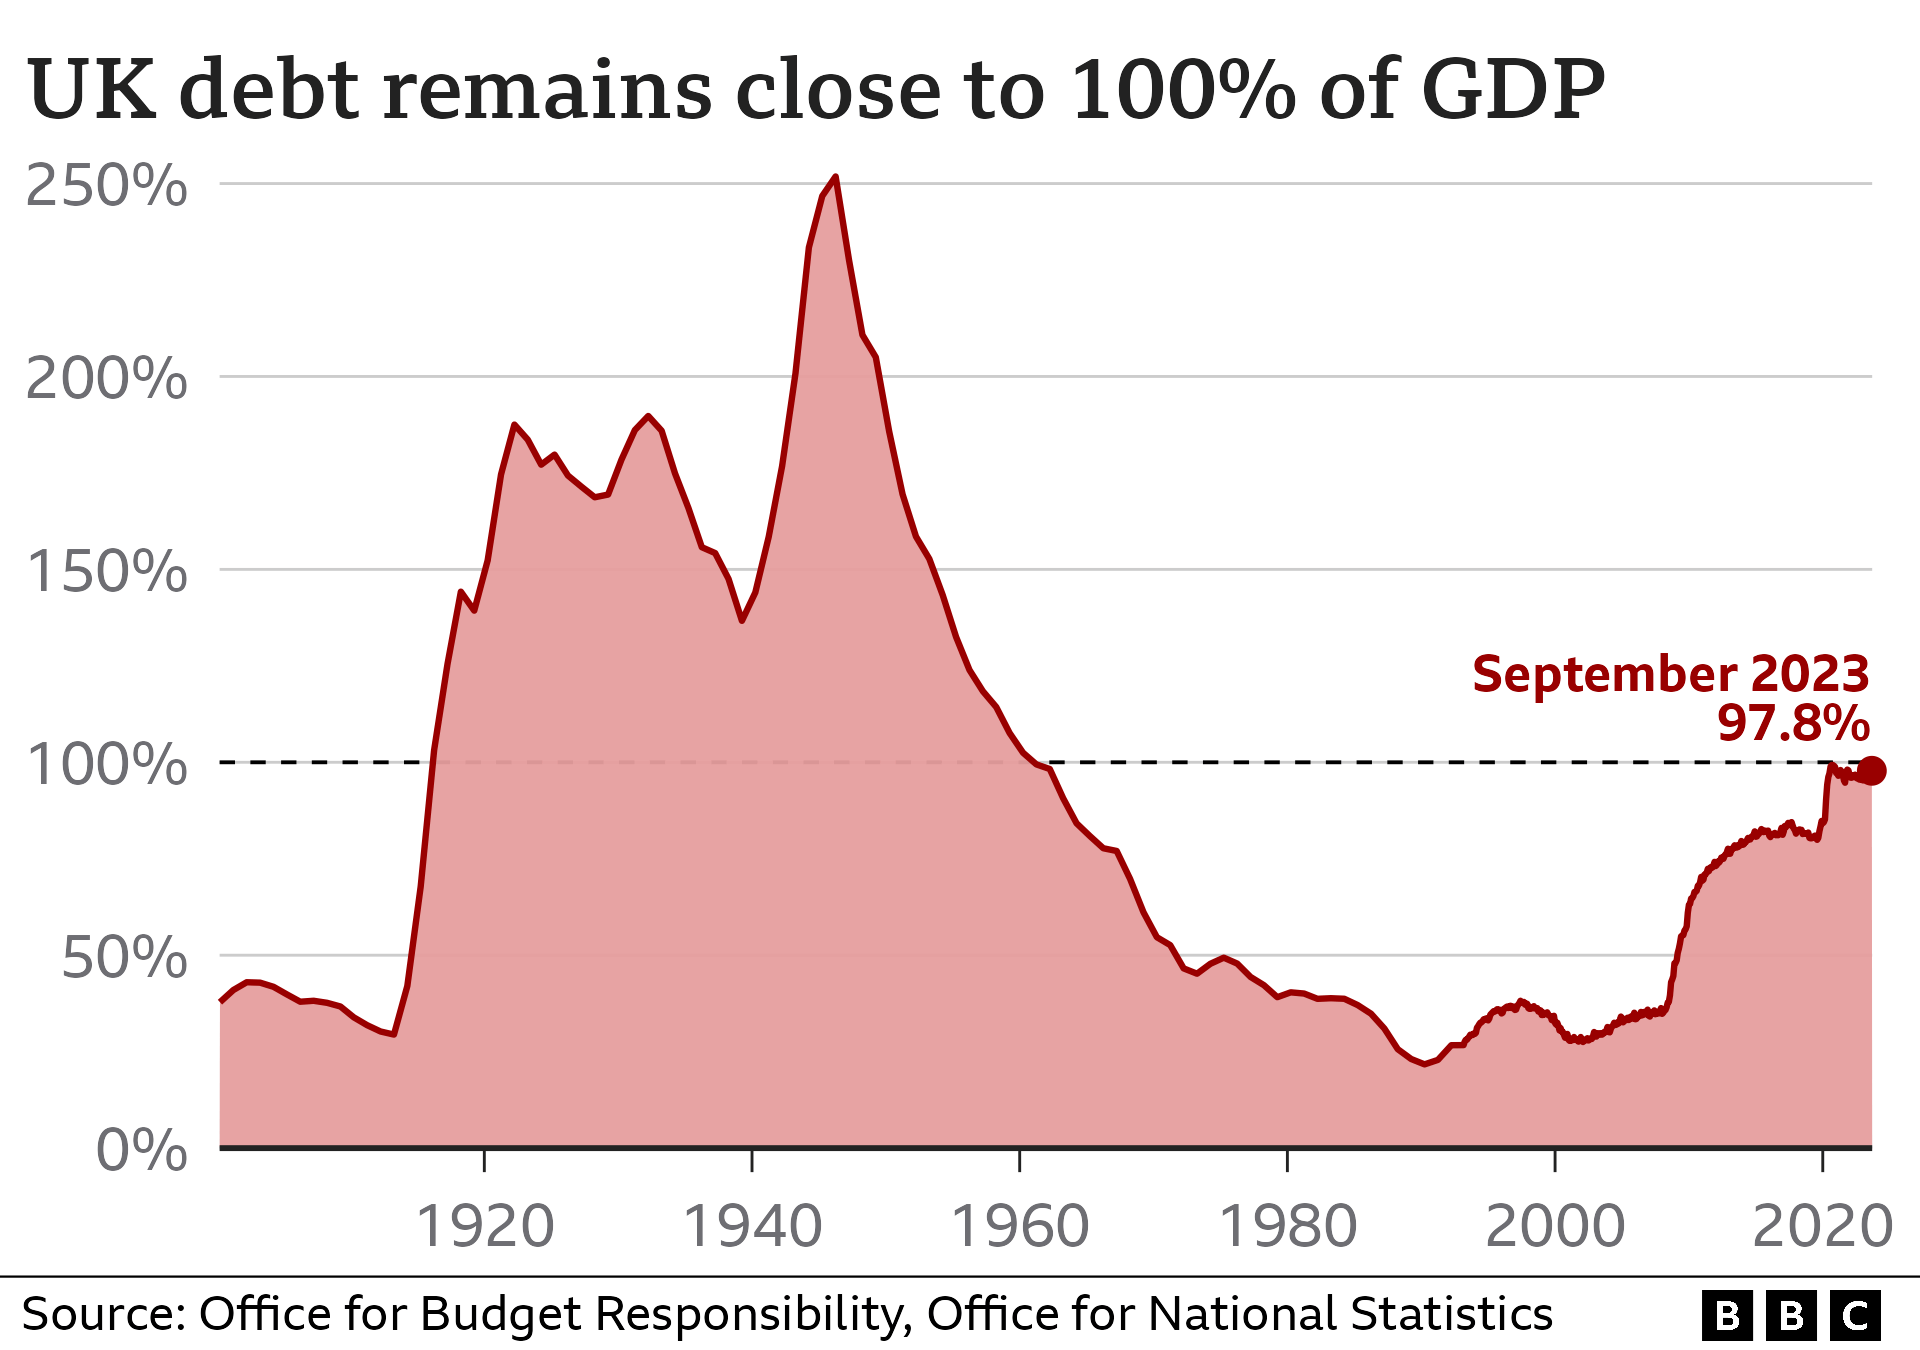 Line chart showing the public sector debt, excluding public banks, as a percentage of GDP. It has increased from around 28% in 2002 to 97.8% in September 2023.